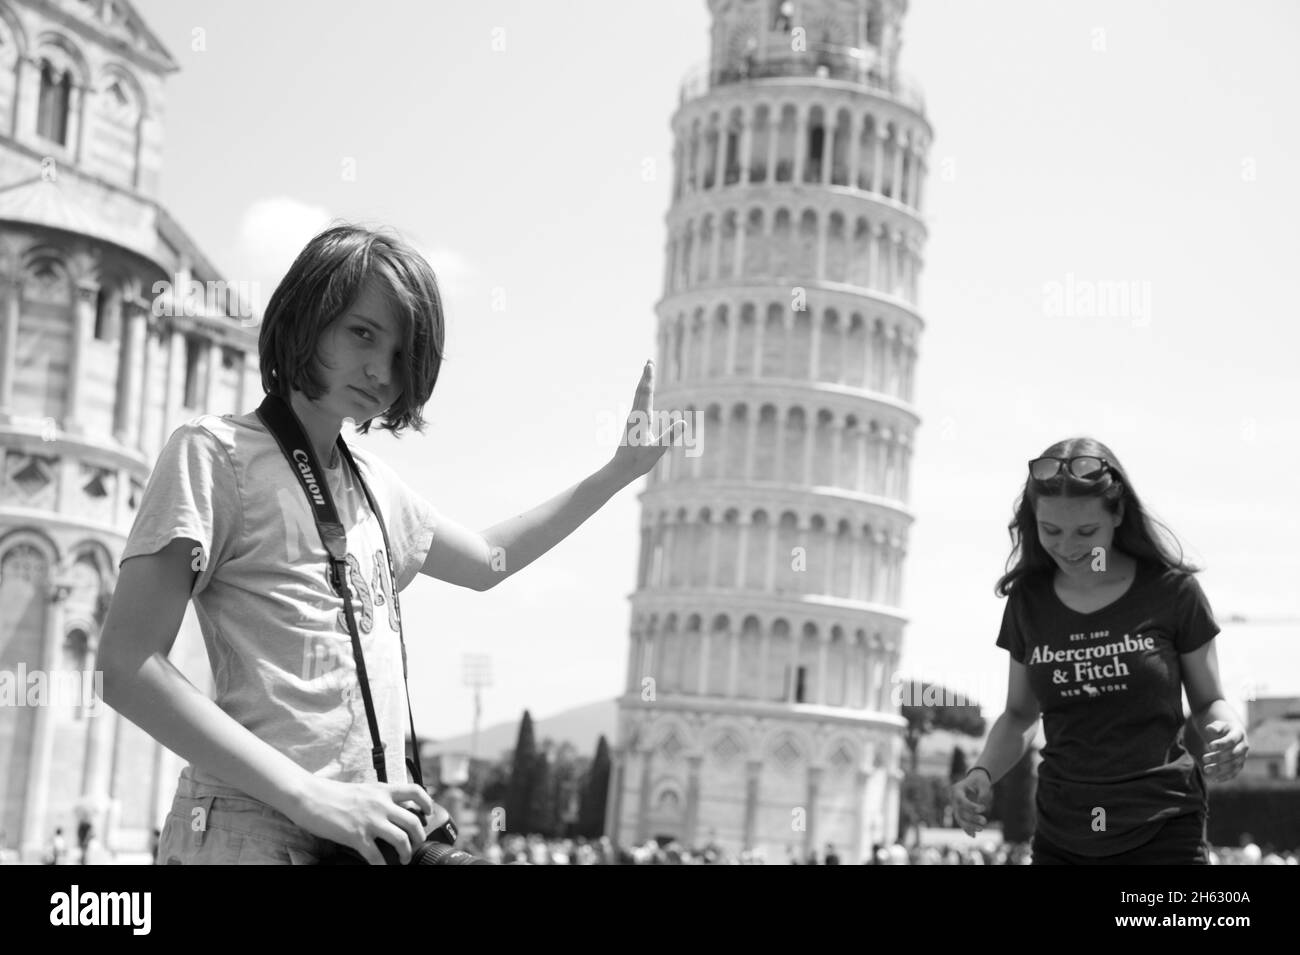 a typical tourist image of the leaning tower of pisa,toscany,italy,where the tourist looks as if he is supporting the tower. Stock Photo